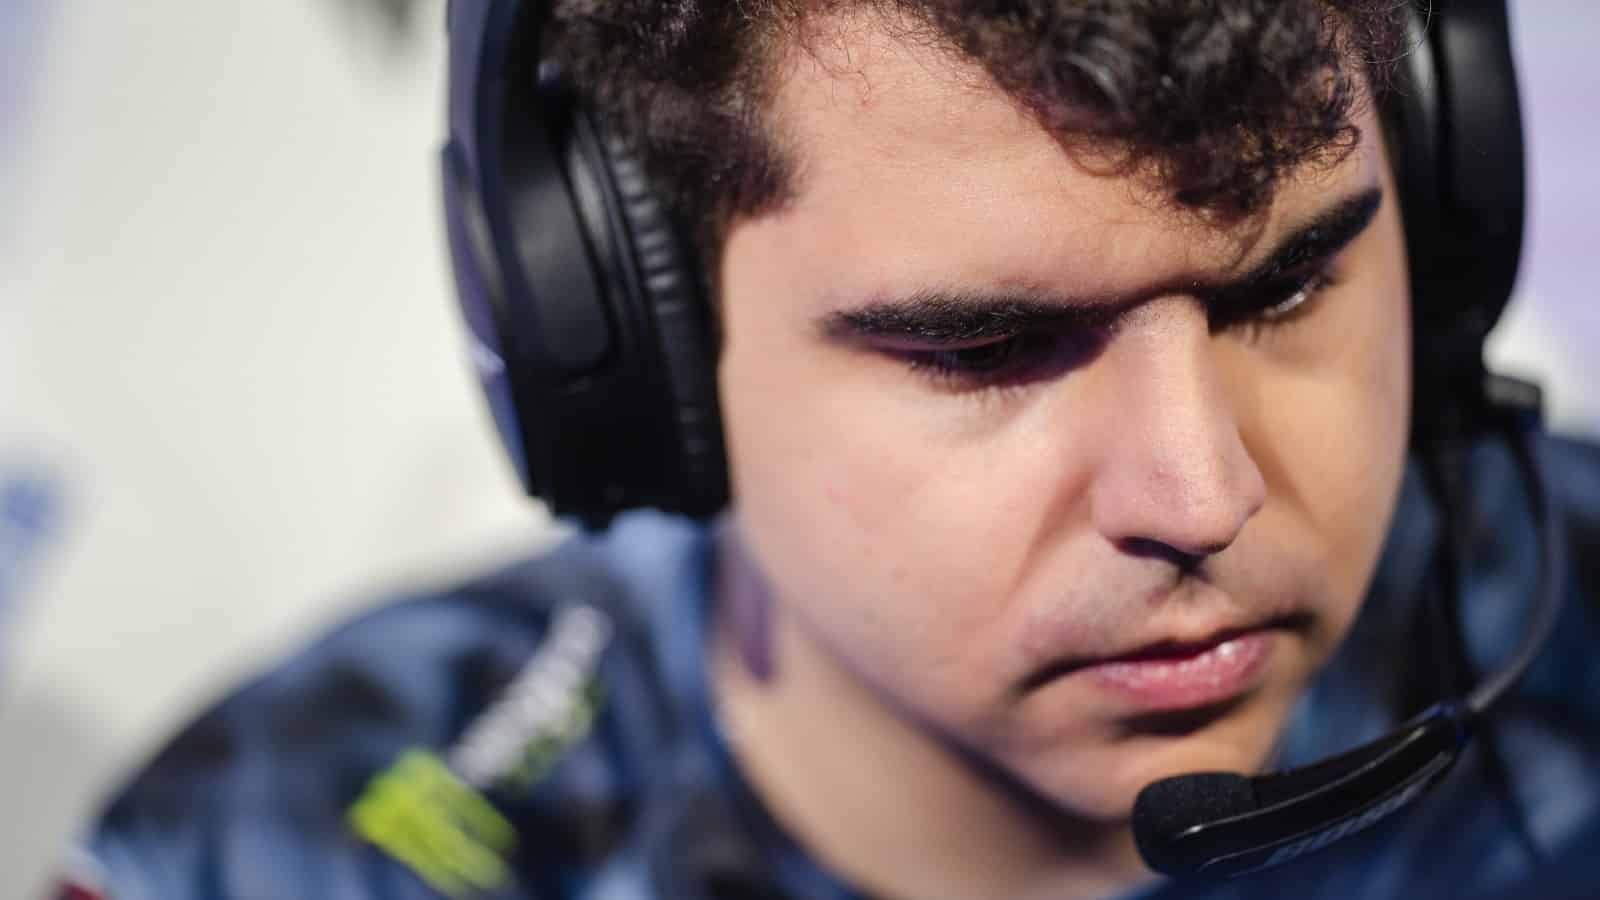 A close up of Bwipo at Worlds